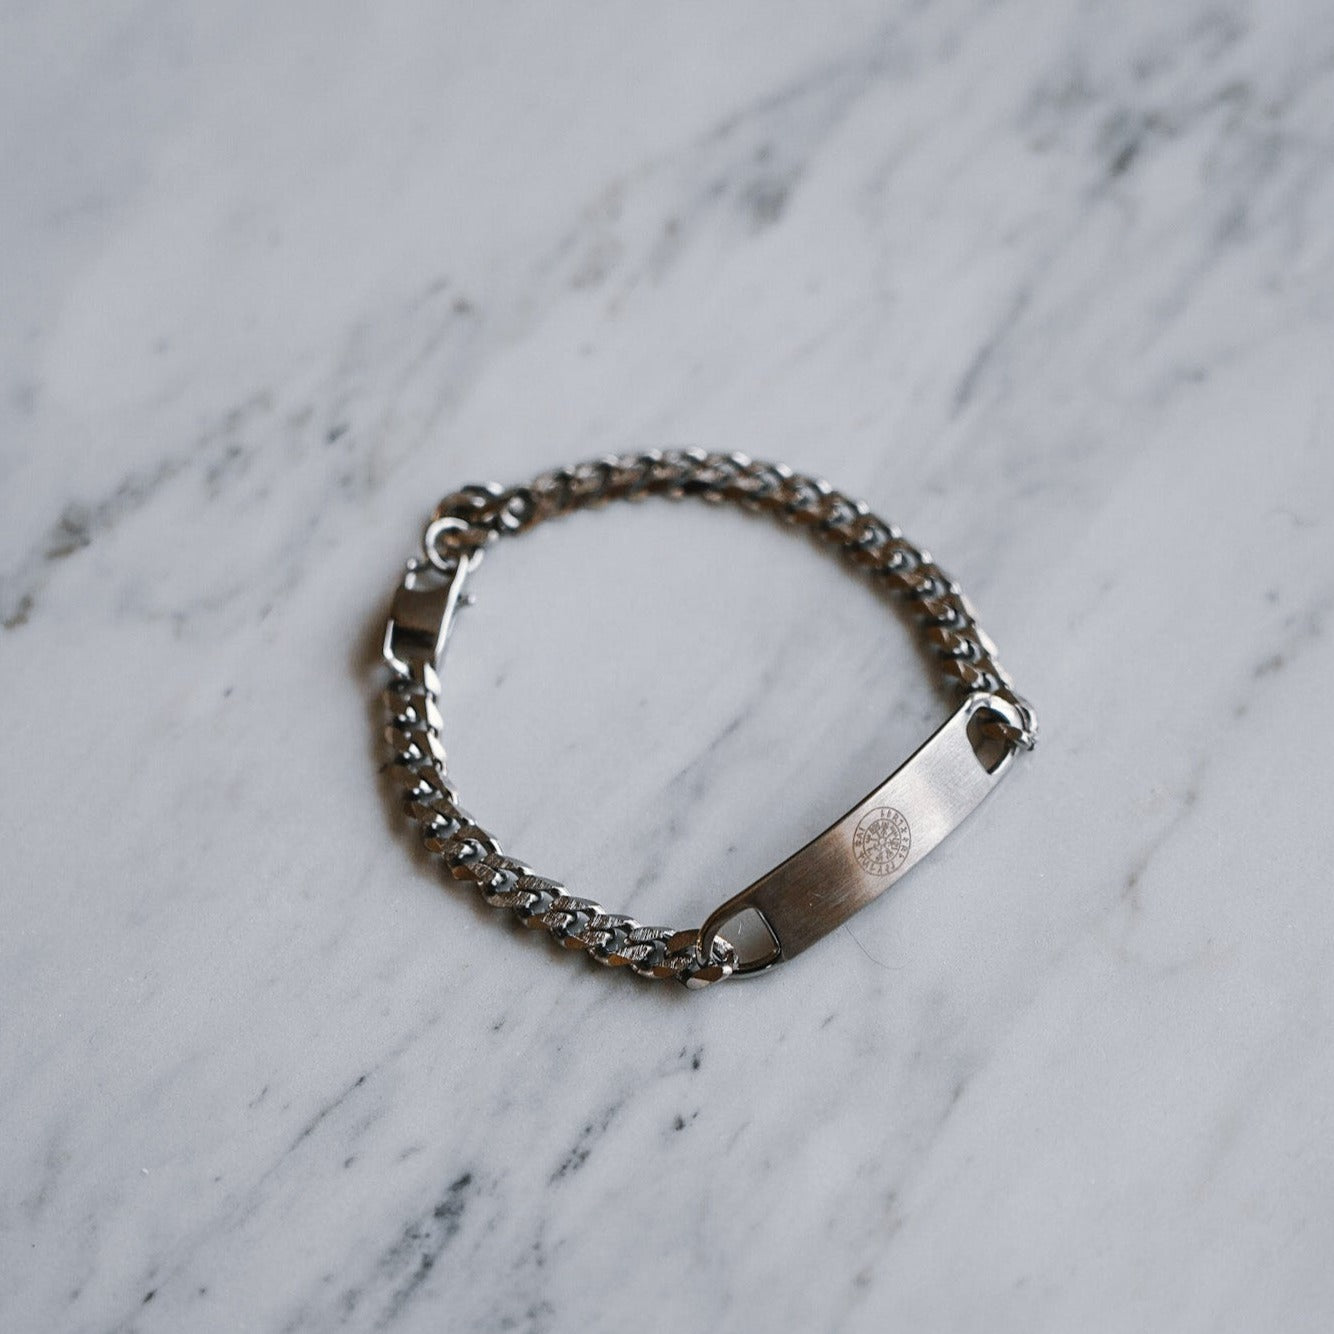 NL Sequence Tag bracelet - Silver-toned